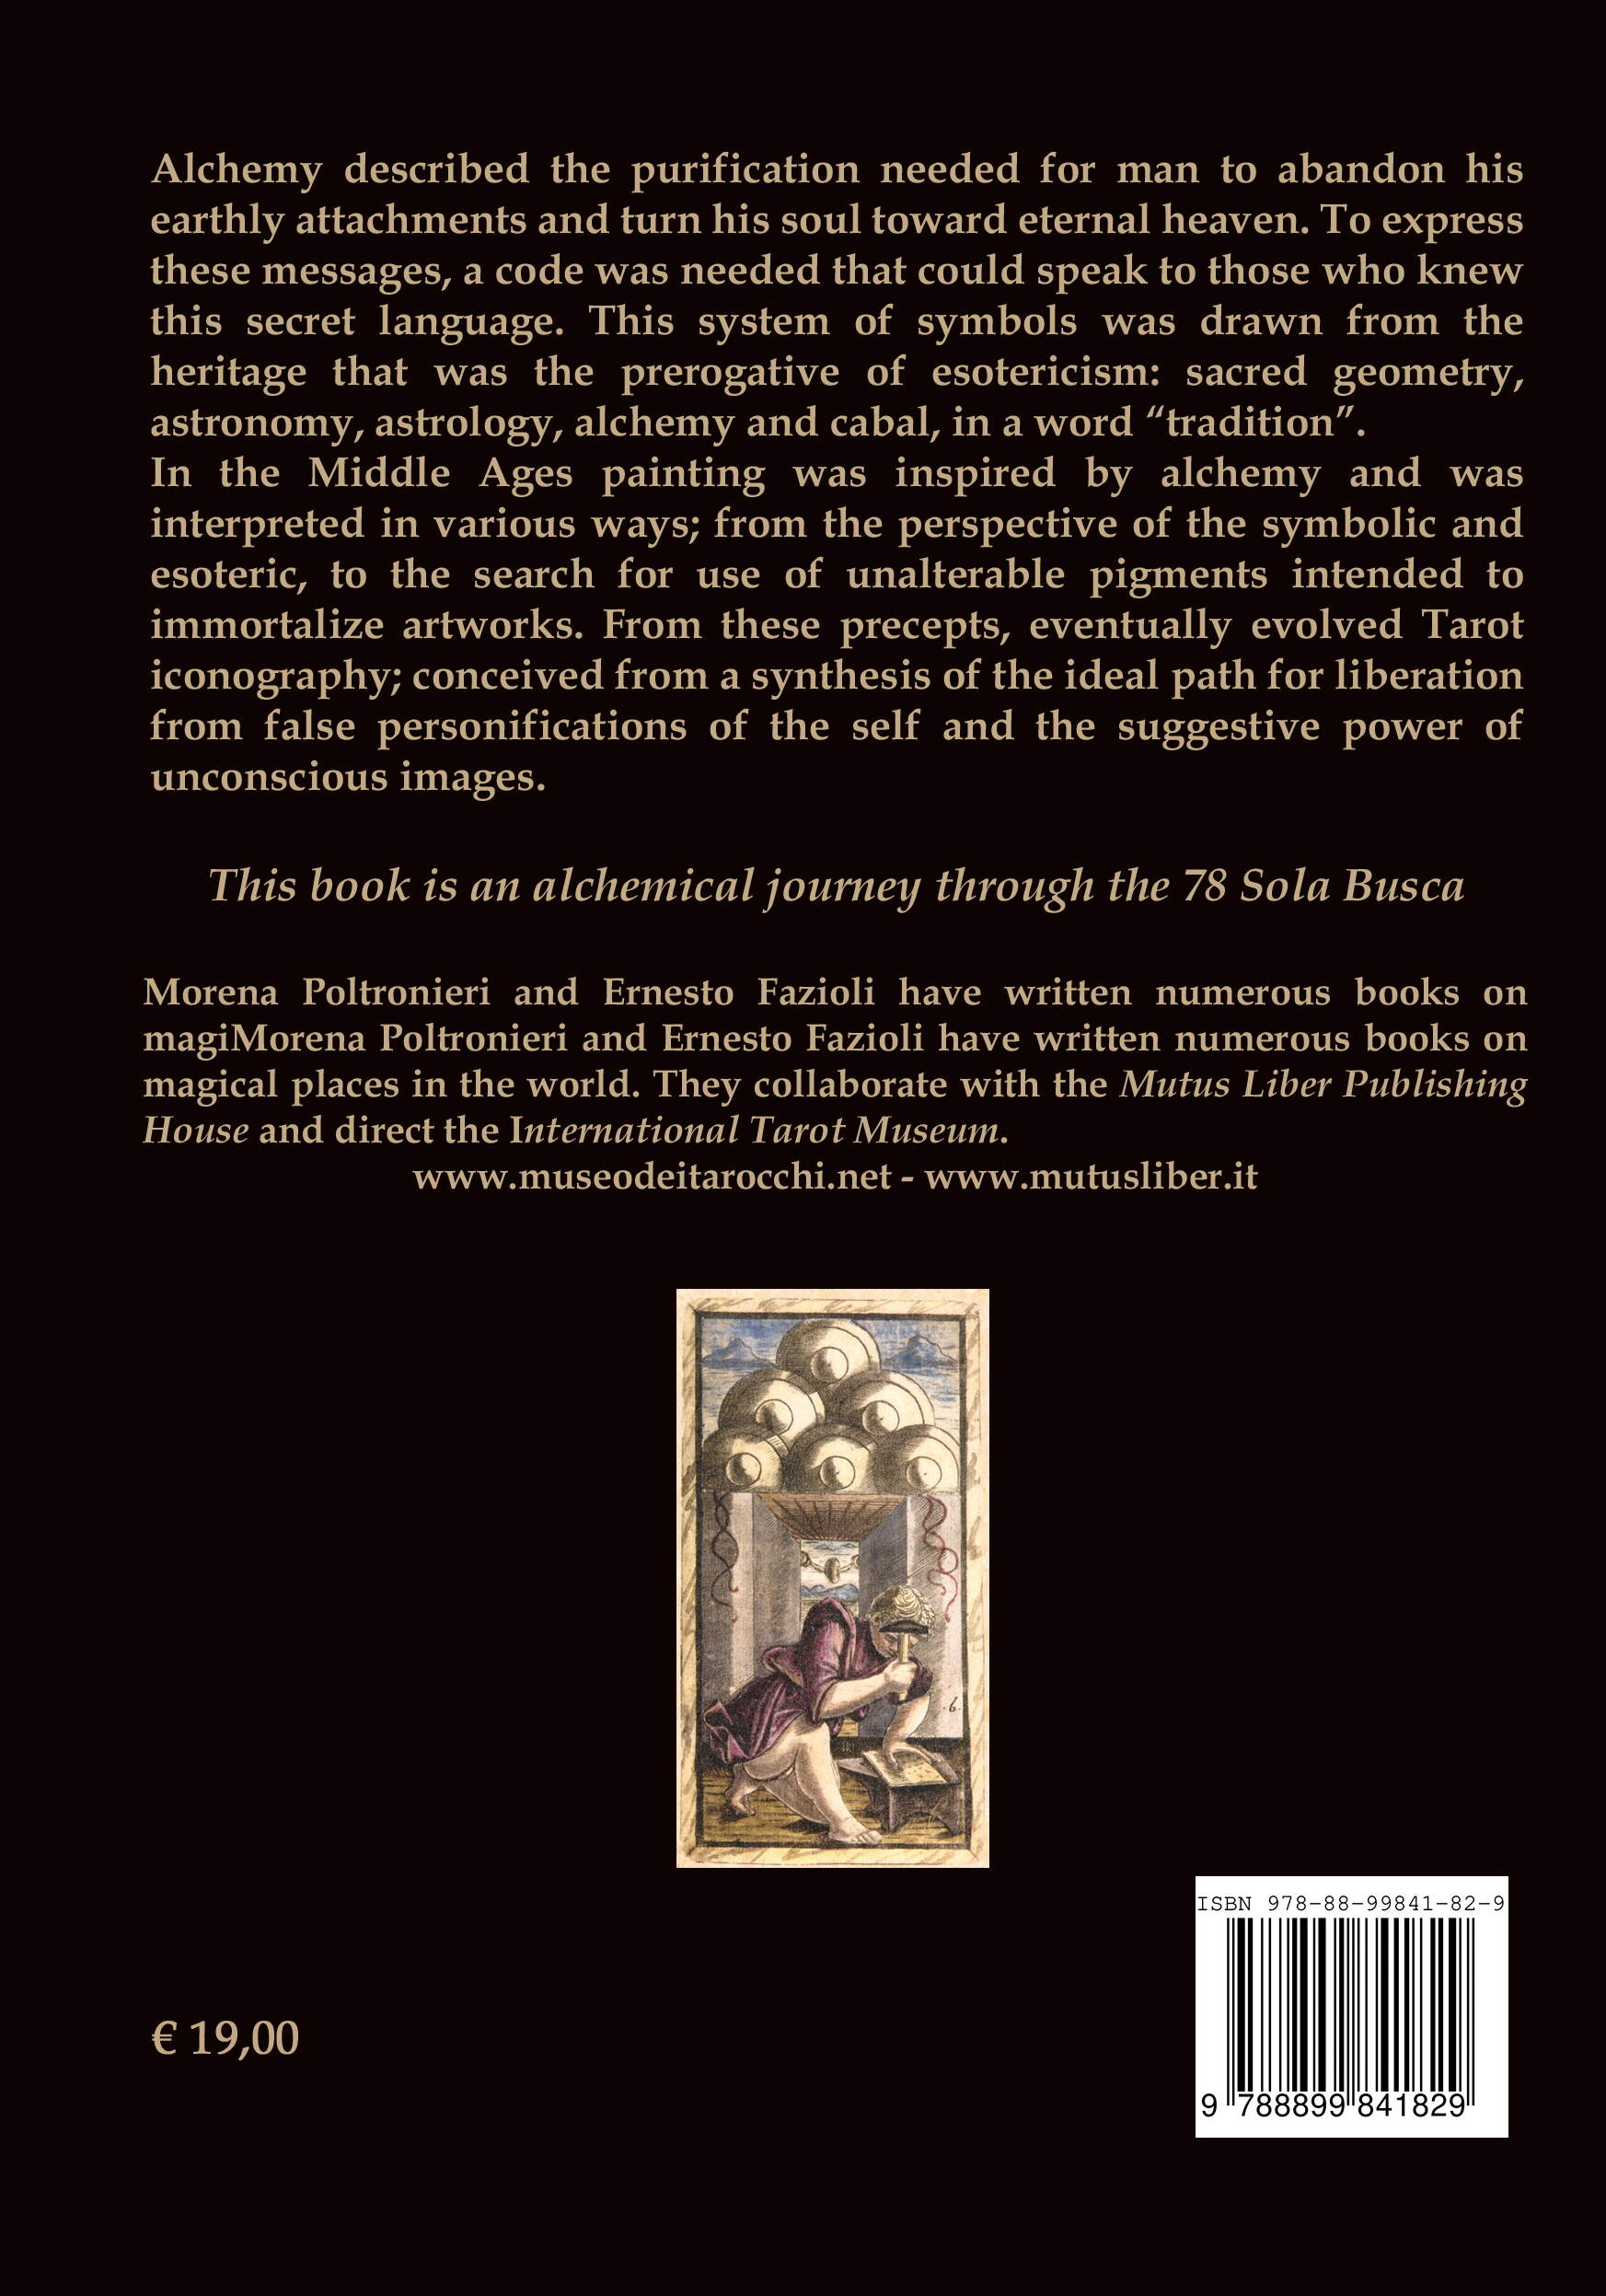 F099 SOLA BUSCA TAROT An alchemical way in 78 paths